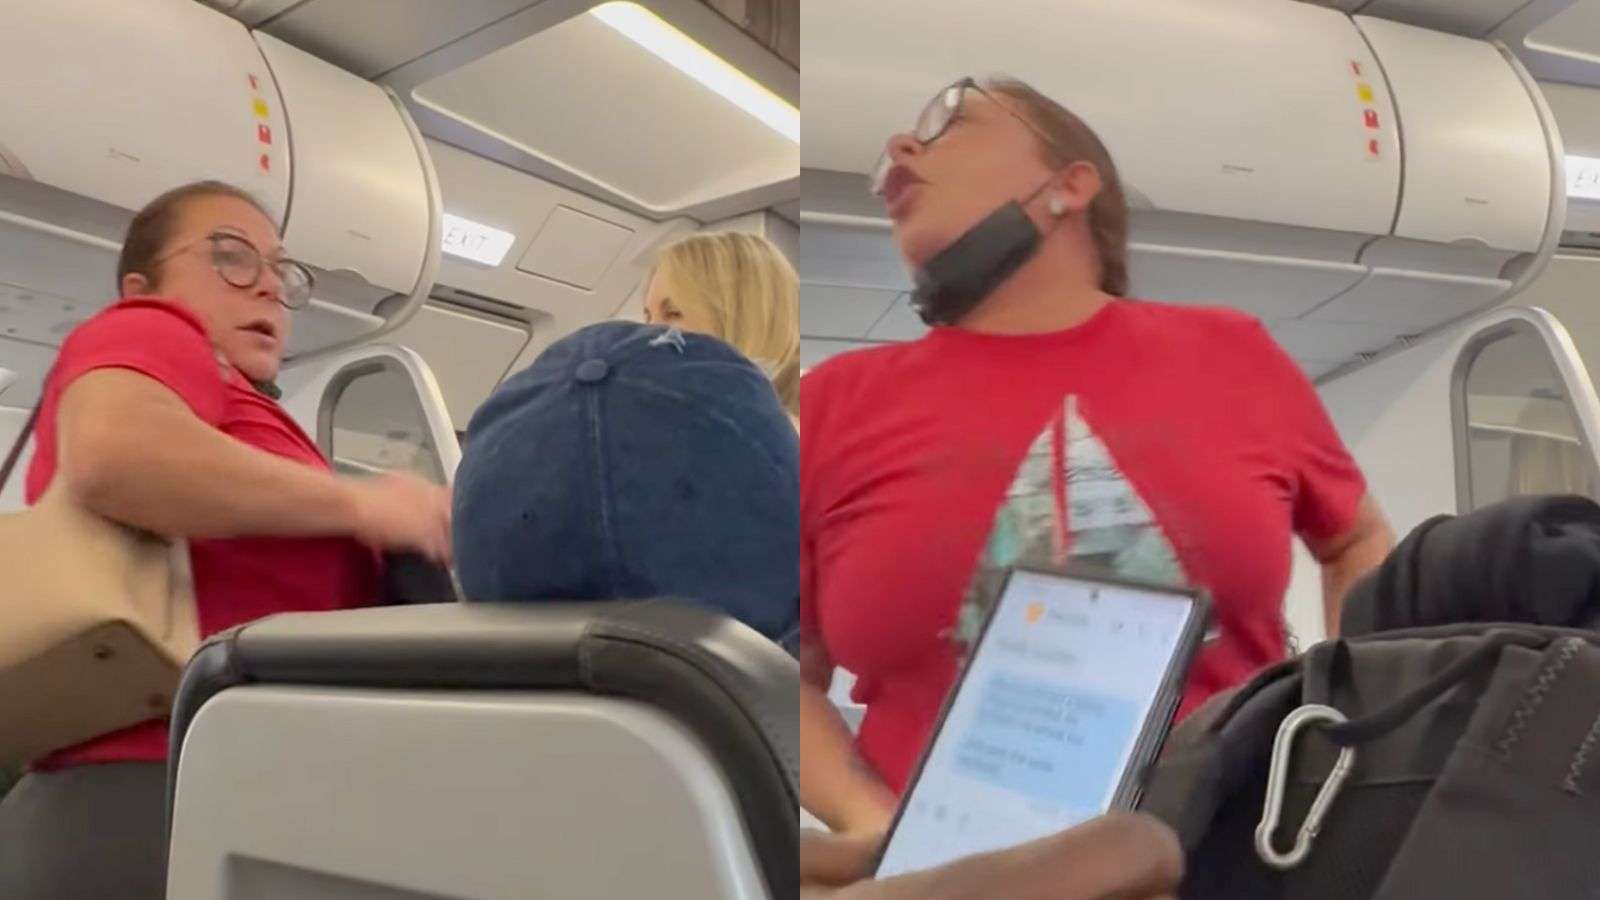 Woman threatens to urinate in plane aisle